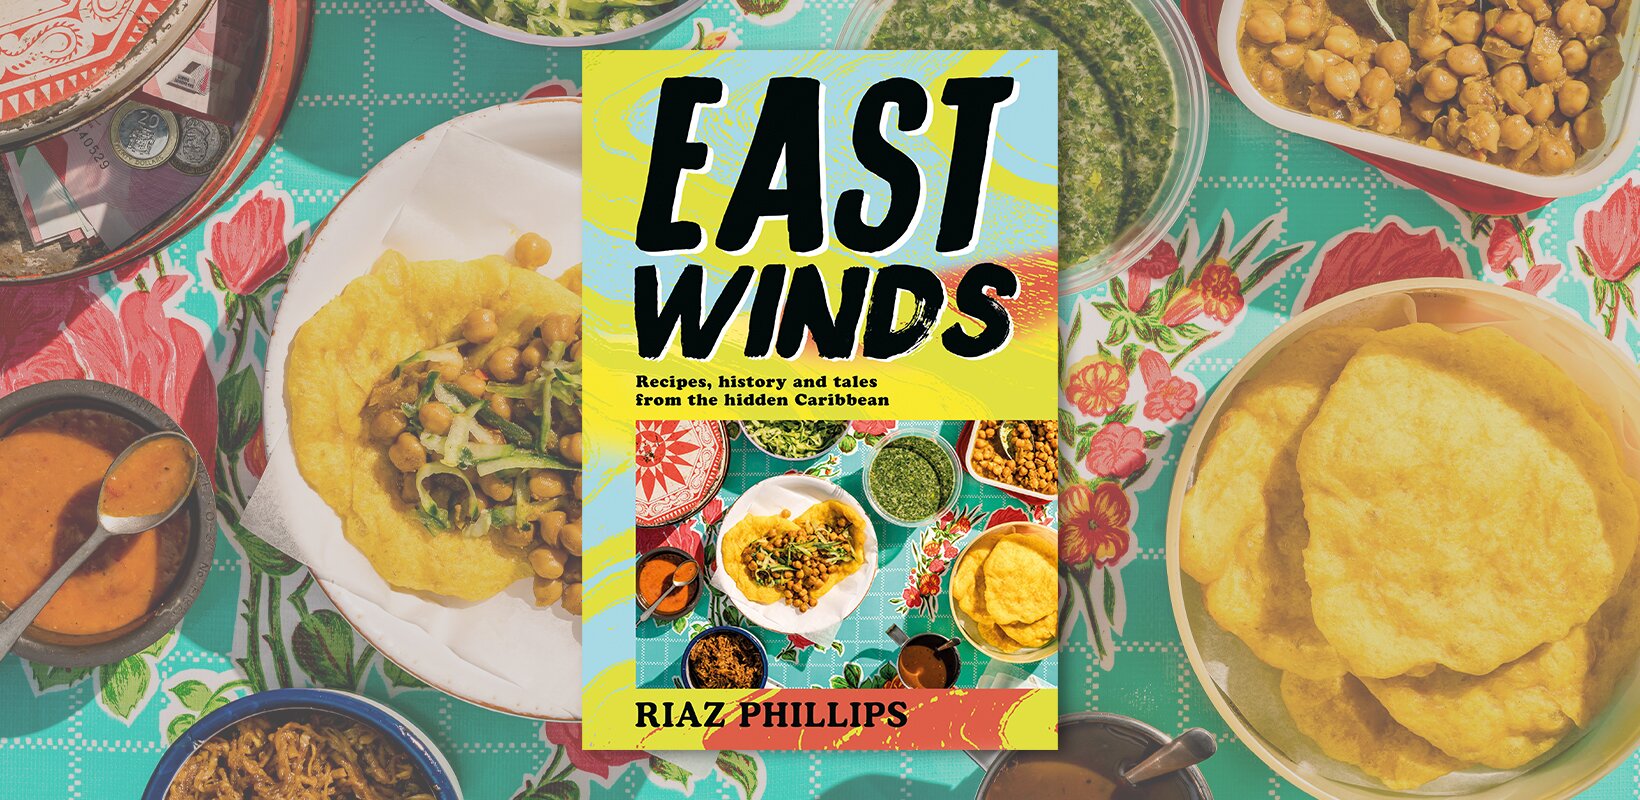 Book review: East Winds by Riaz Phillips